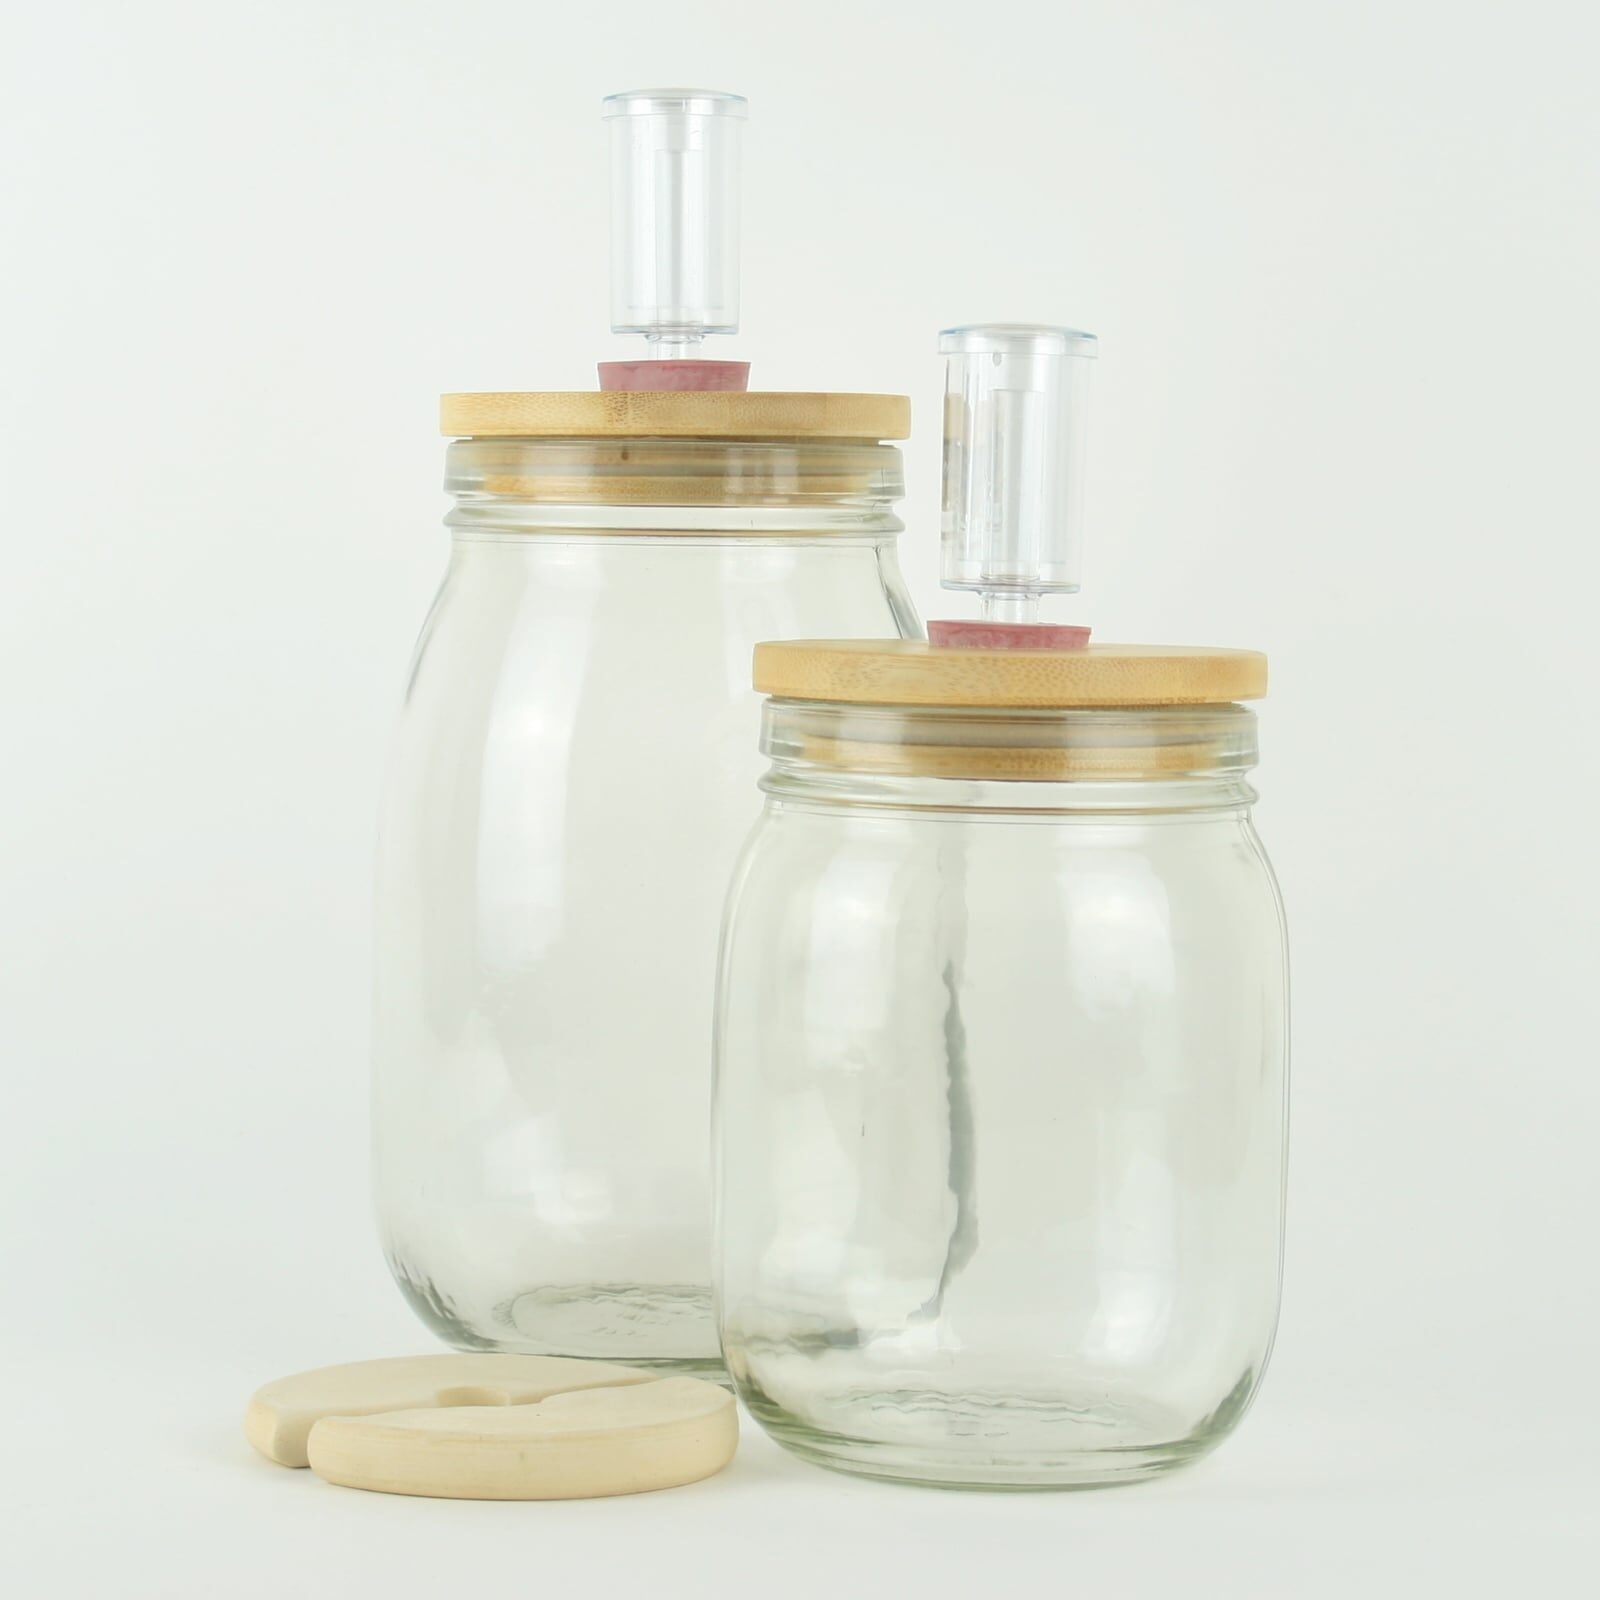 Glass fermentation jar sets with ceramic weights, wooden lids and brewing airlocks. For making sauerkraut and kimchi.